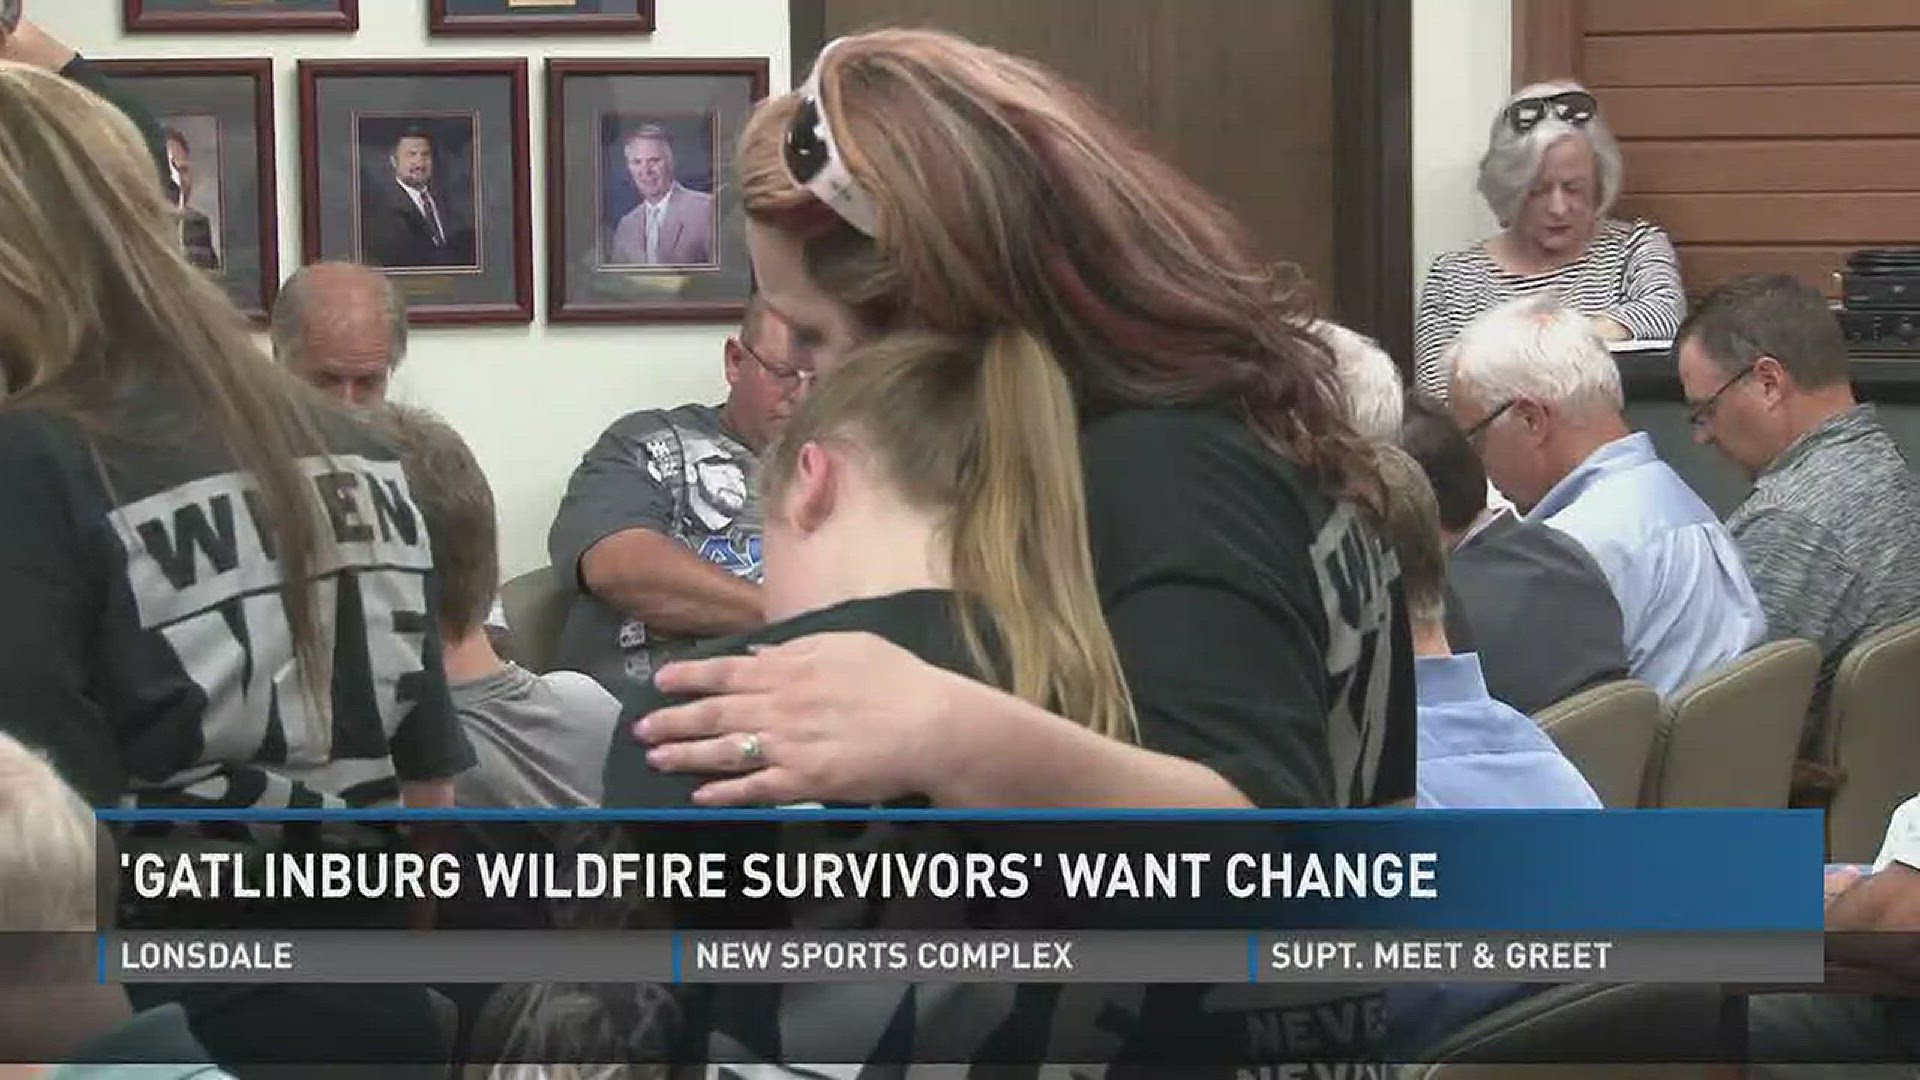 Members of the Gatlinburg wildfire survivors group raised more concerns about ongoing safety and recovery in the mountains.